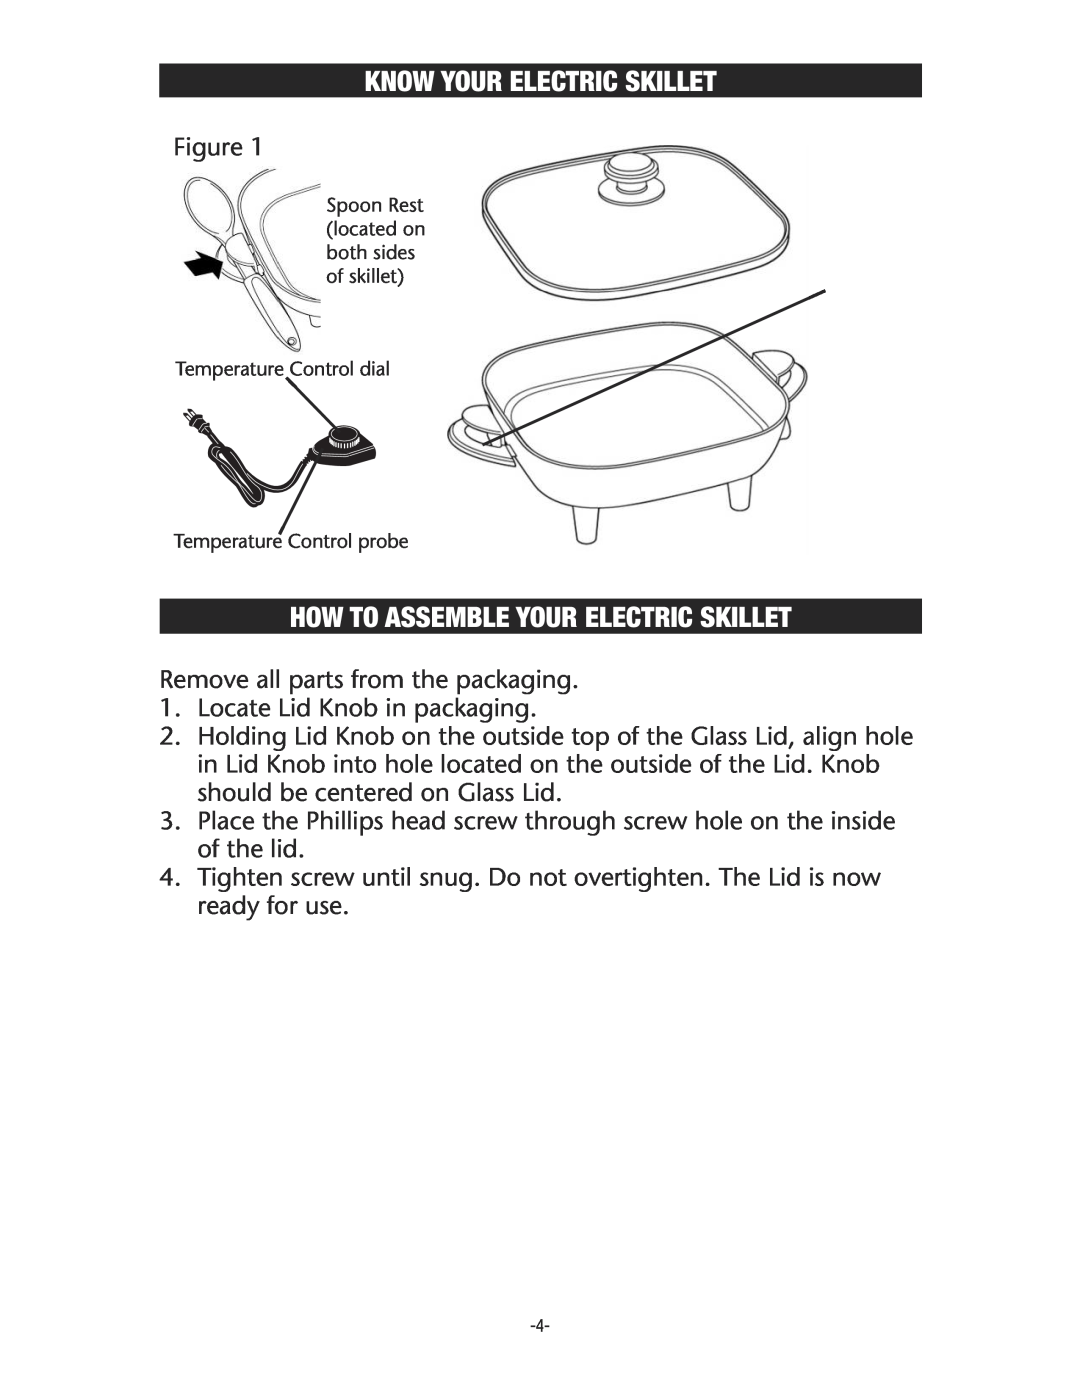 Rival S11P manual Know Your Electric Skillet, How To Assemble Your Electric Skillet 